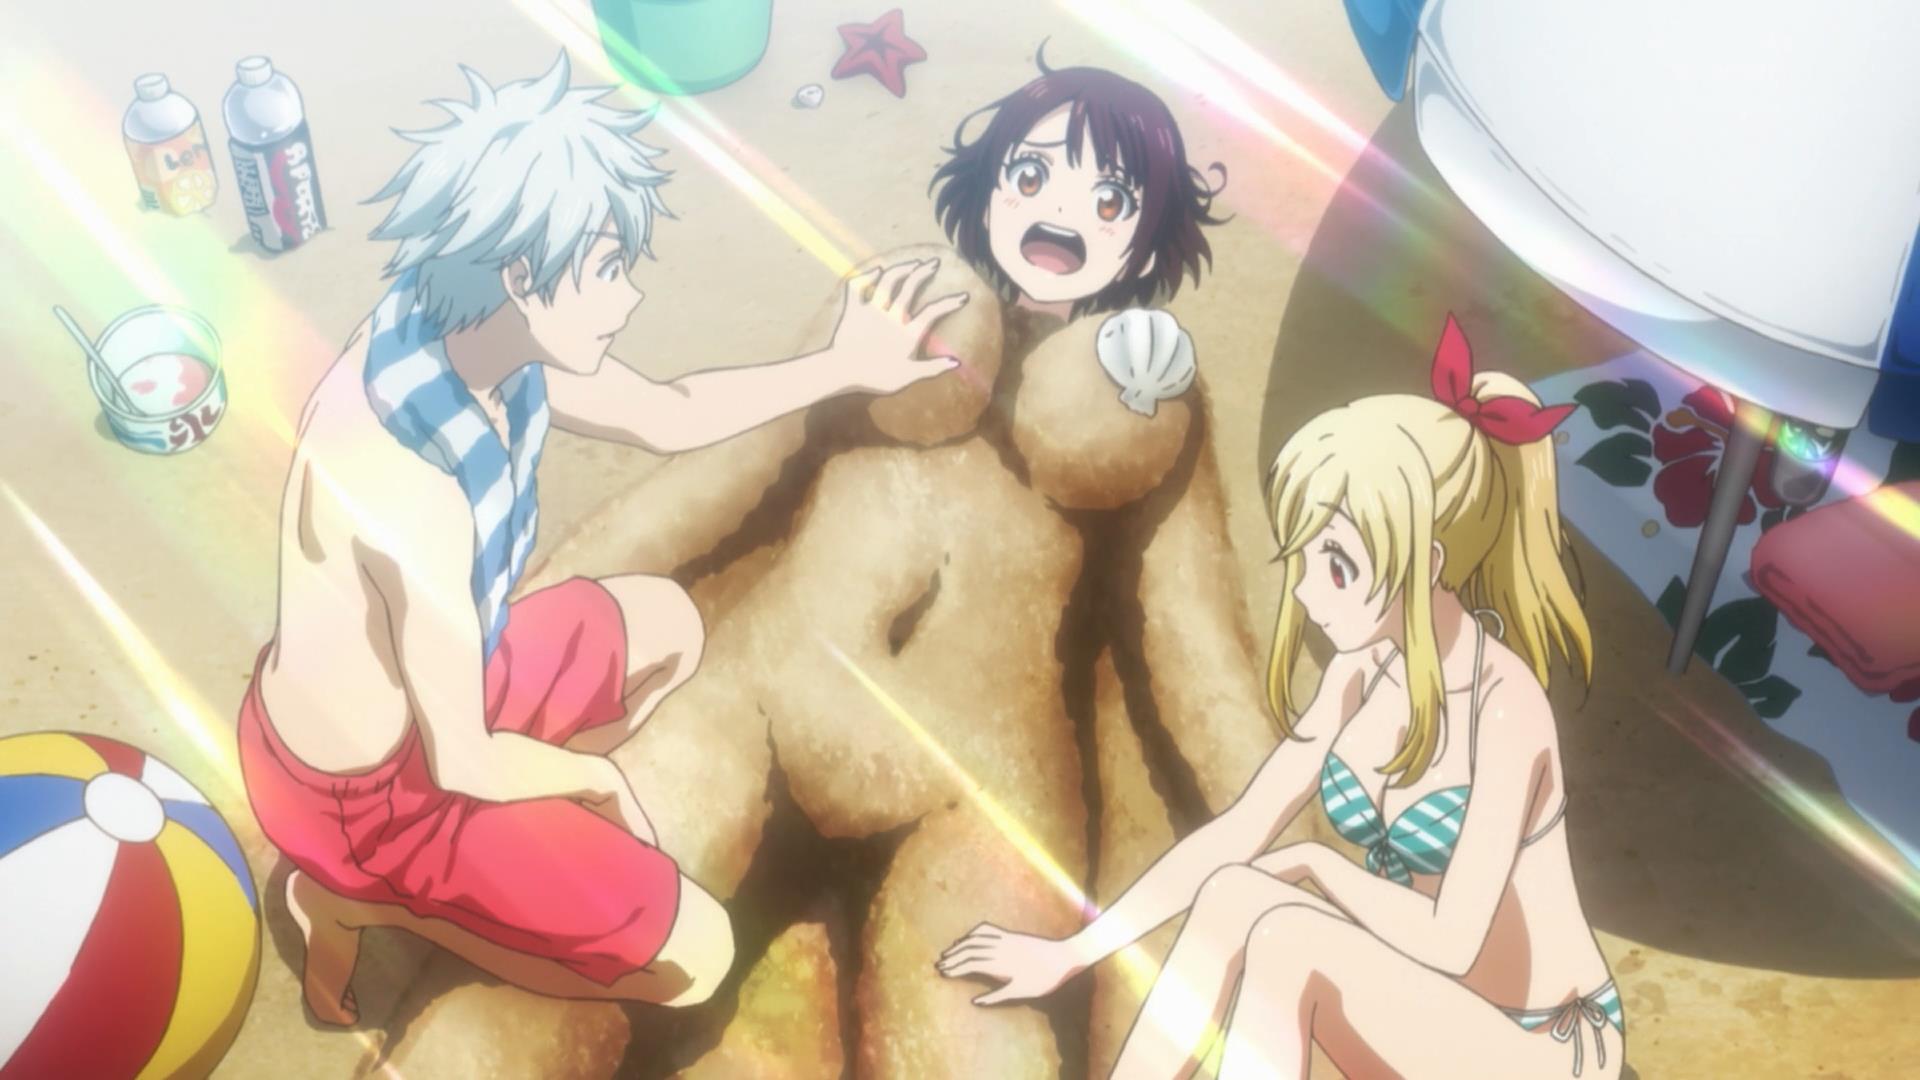 [HorribleSubs] Yamada-kun and the Seven Witches - 06 [1080p].mkv_snapshot_19.52_[2015.05.17_13.59.47]